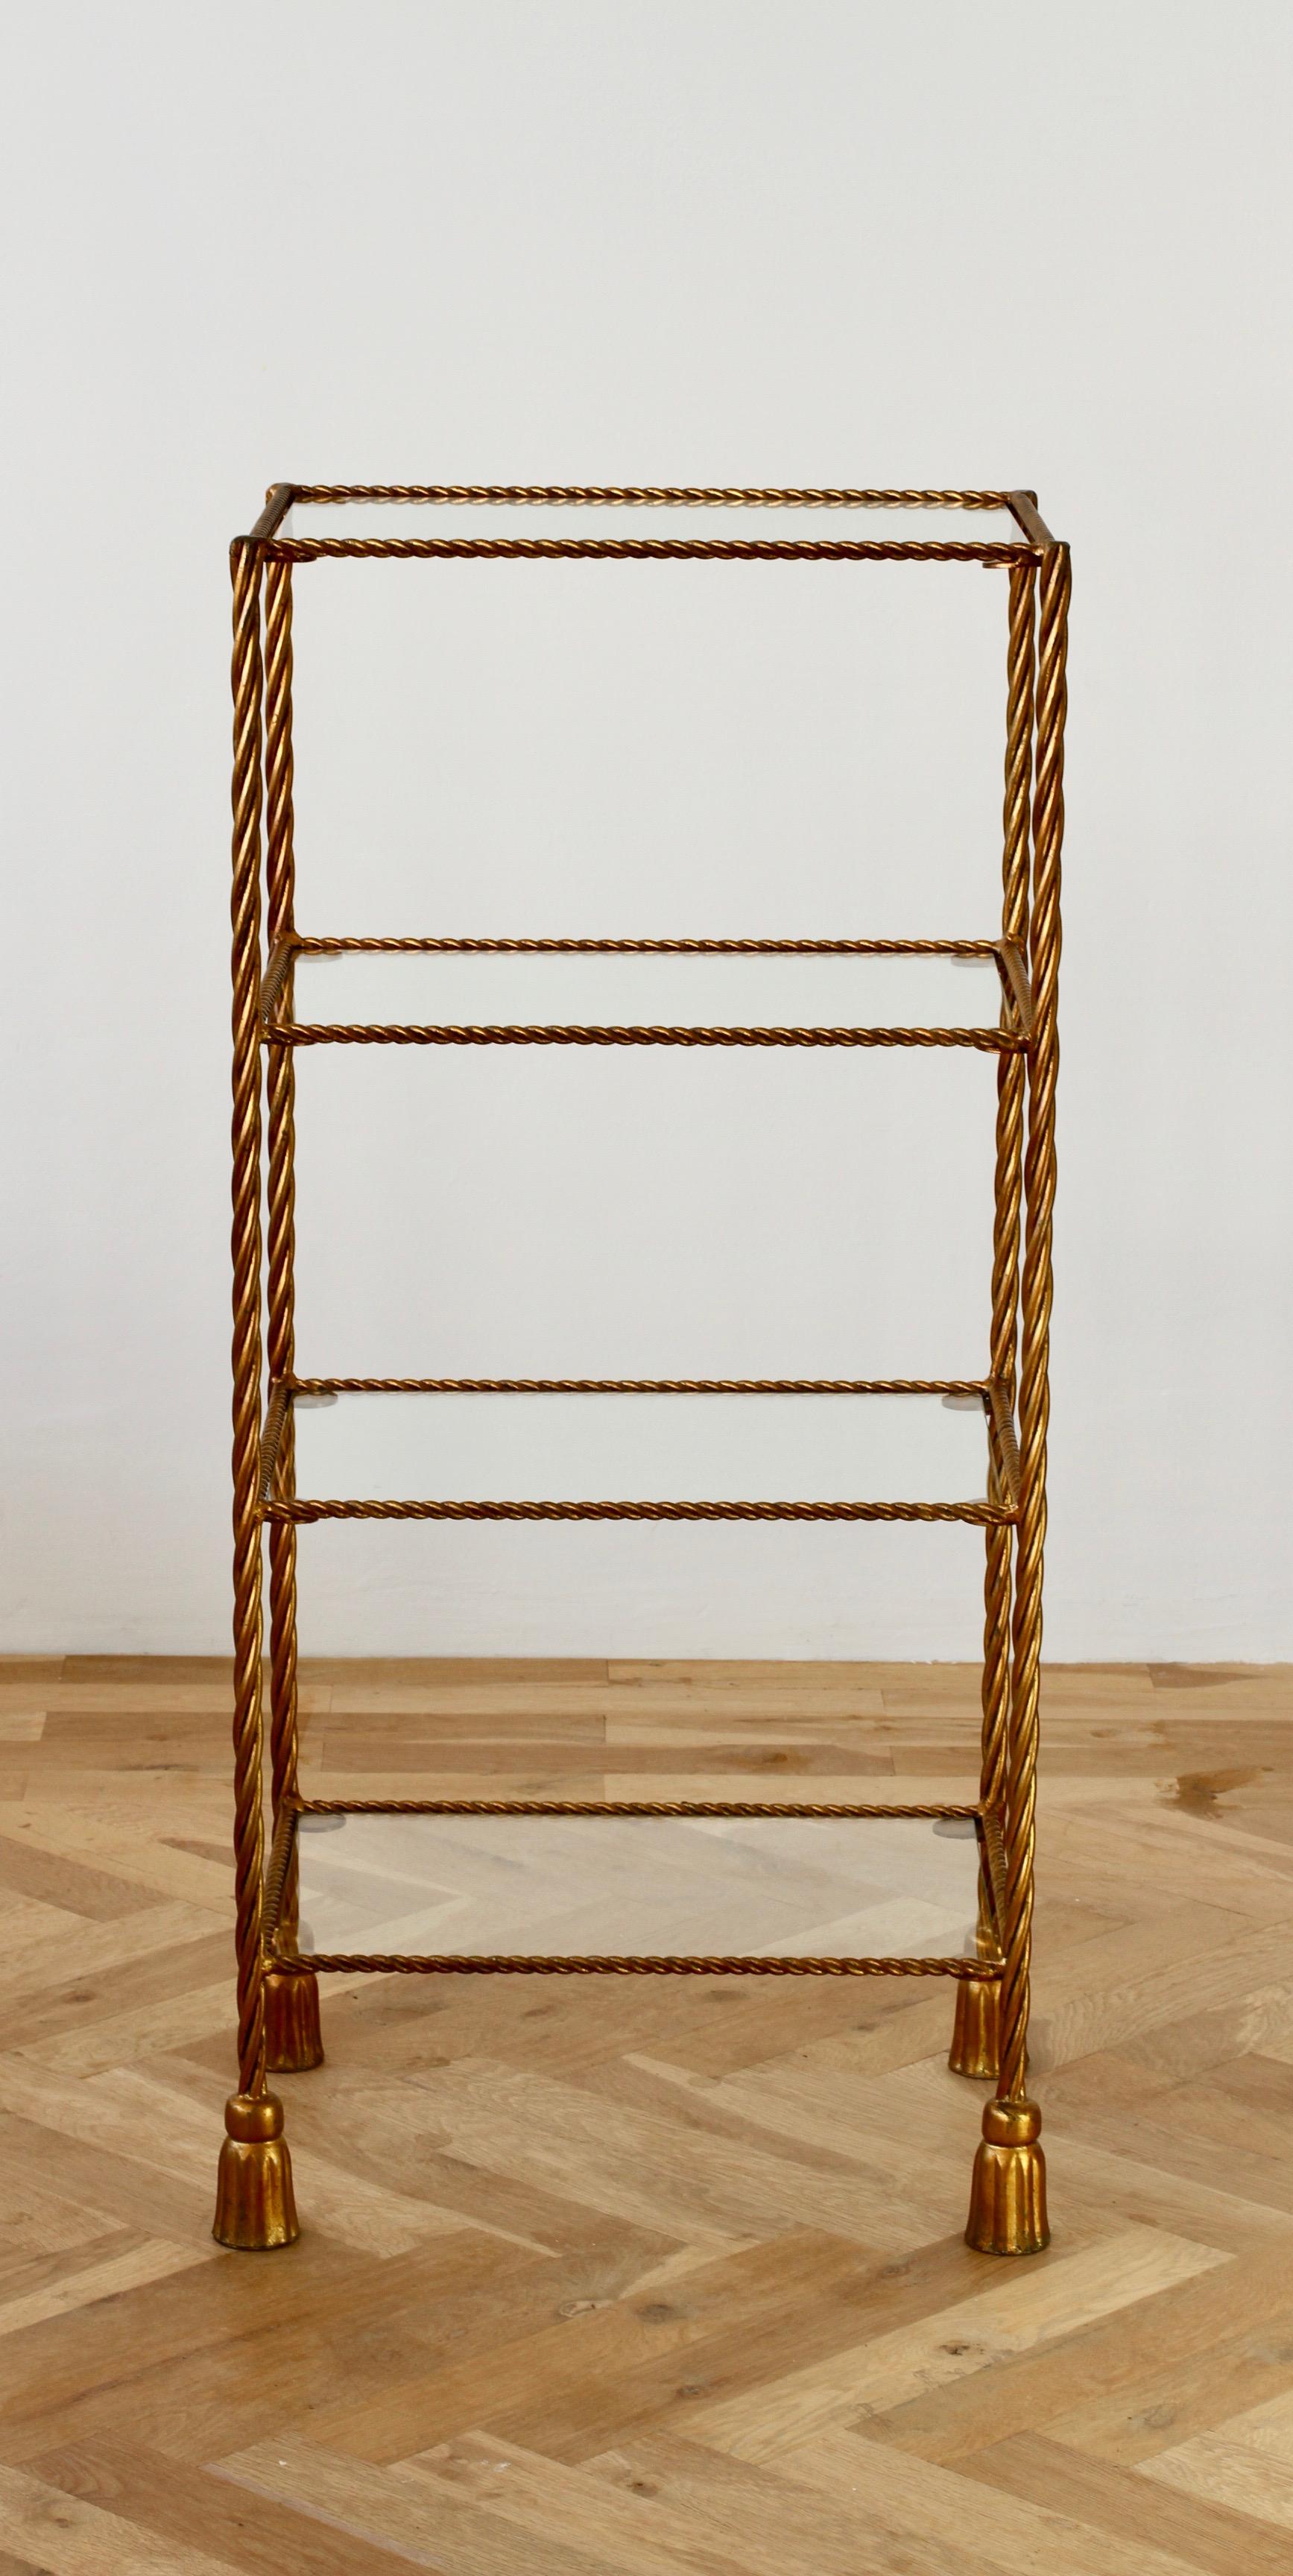 A beautiful handmade Mid-Century 1950s French or Italian made gold gilded wrought iron shelves, bookshelf or stand. Perfect for any lover of the Hollywood Regency style.

Would make an excellent shelve in a bathroom for products and accessories or